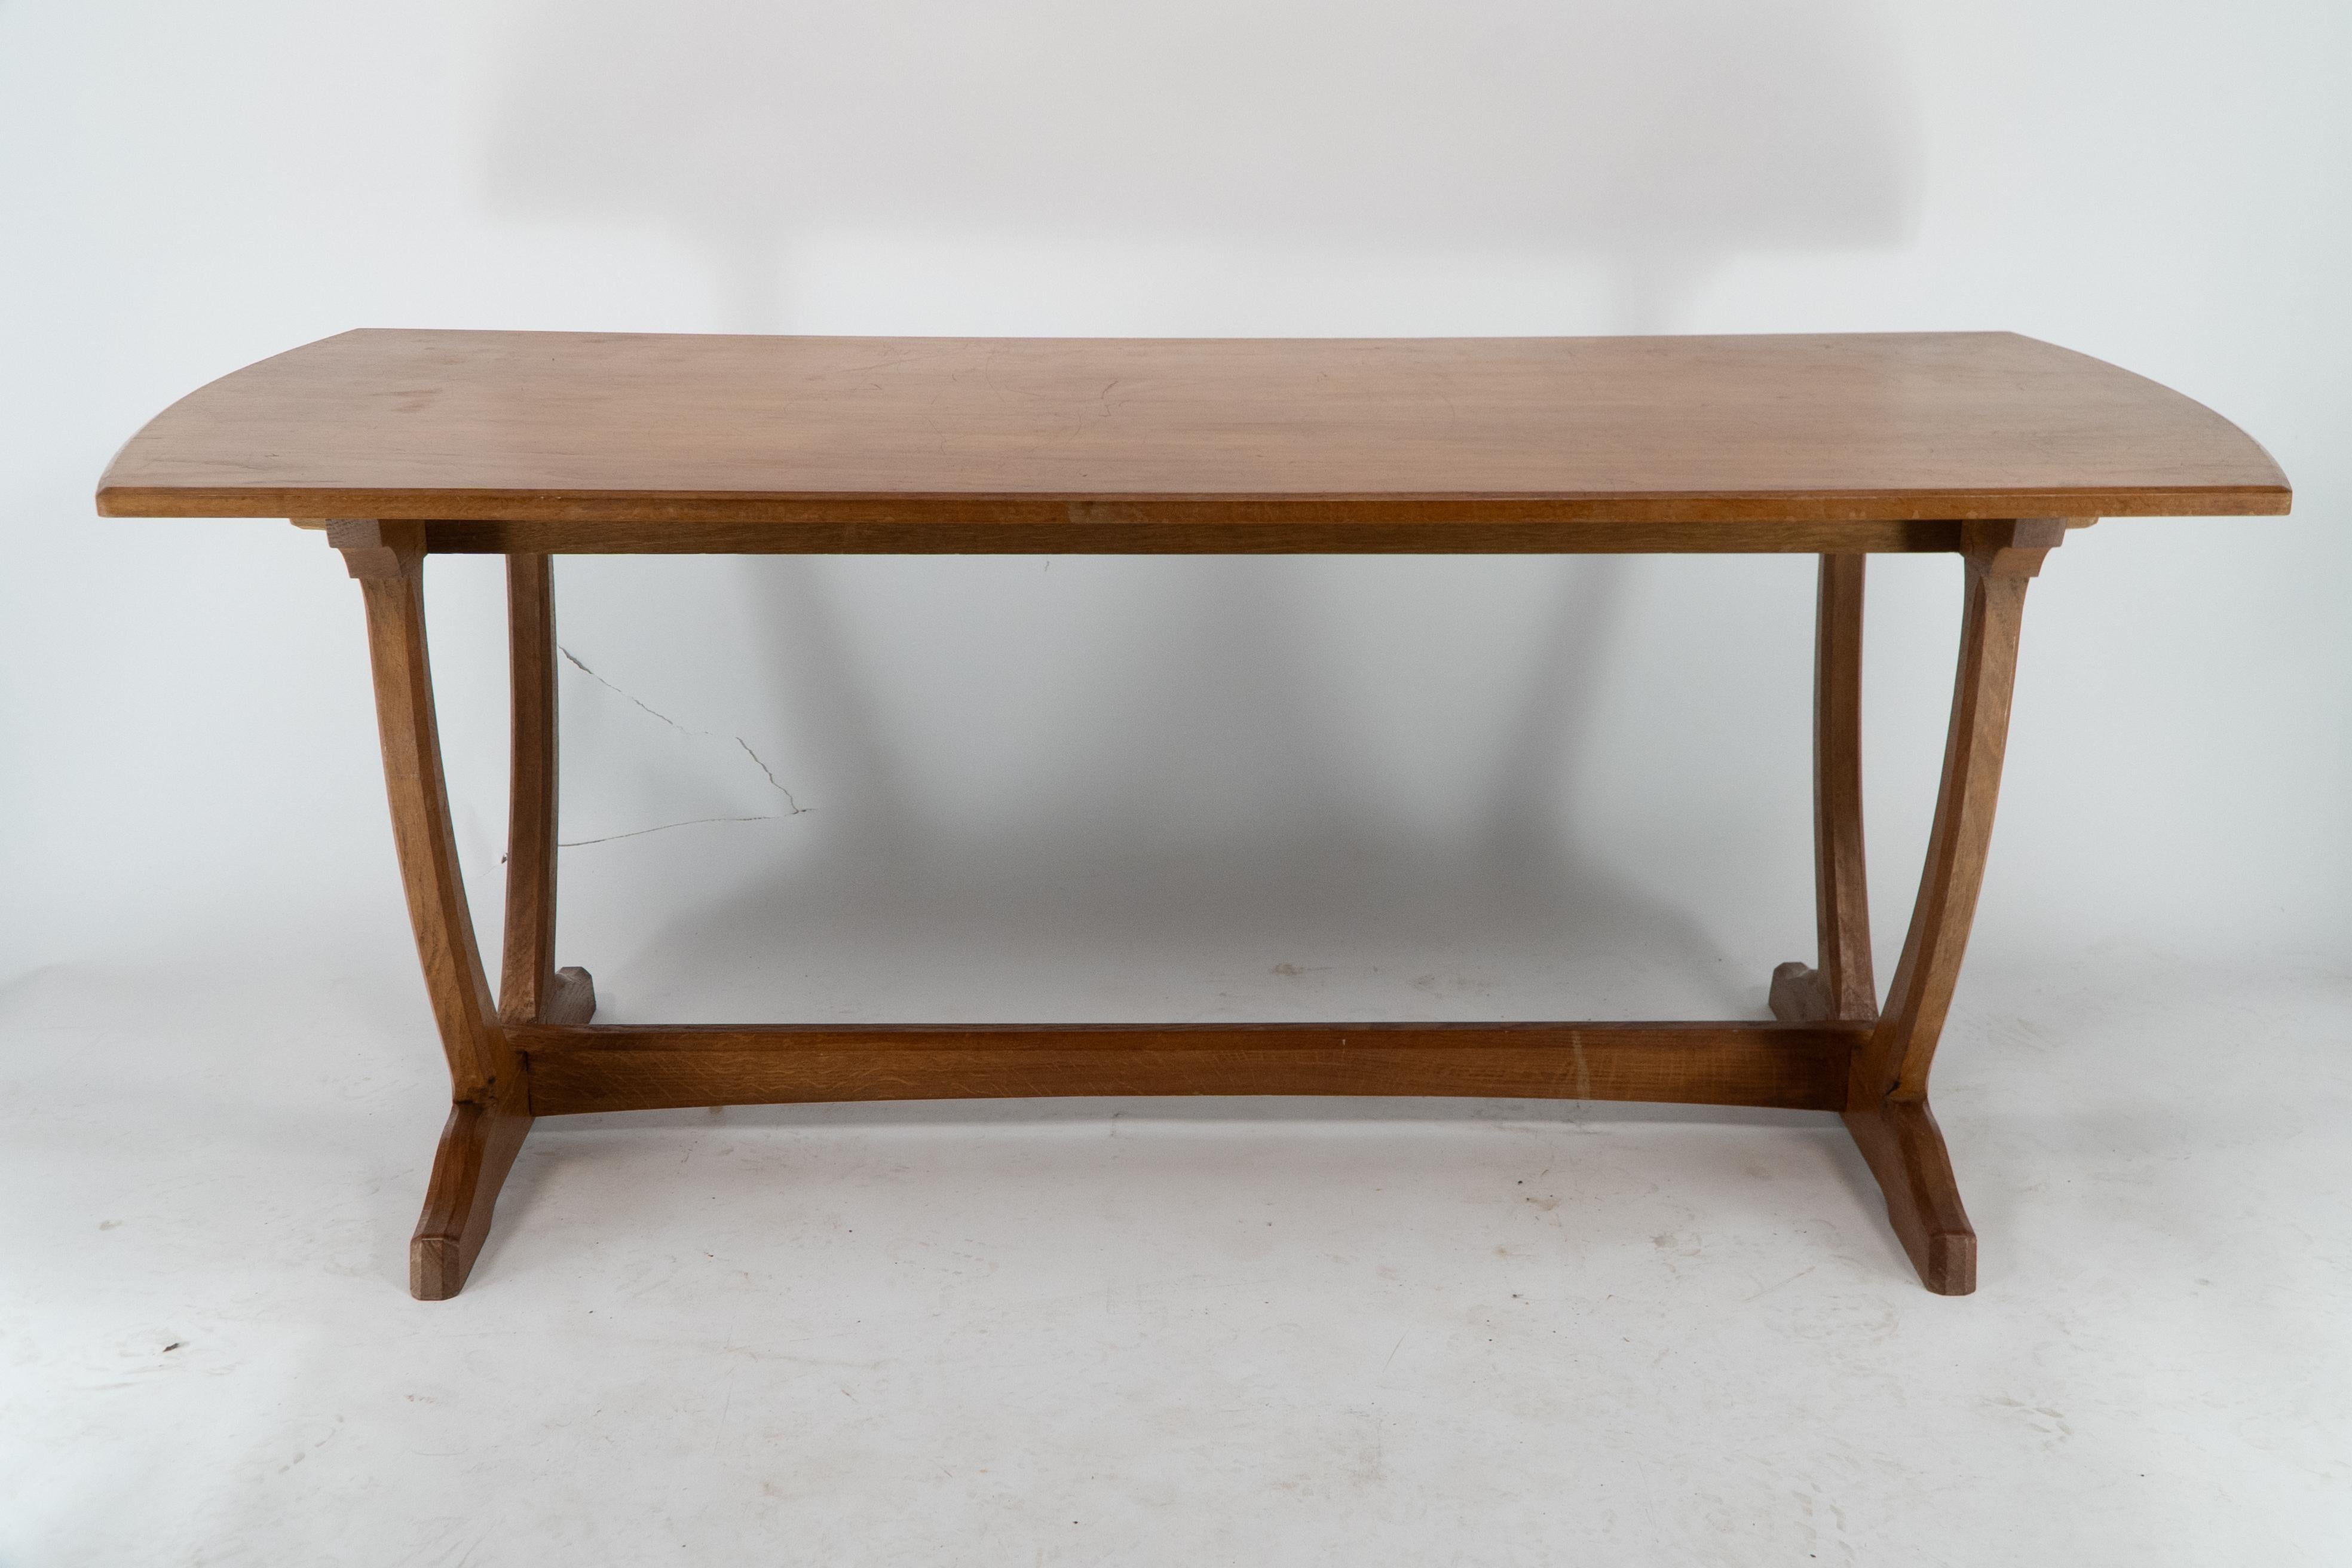 Edward Barnsley. A Cotswold School Arts & Crafts oak coffee table with U shaped base. A quality table with through tenon and pegged construction.